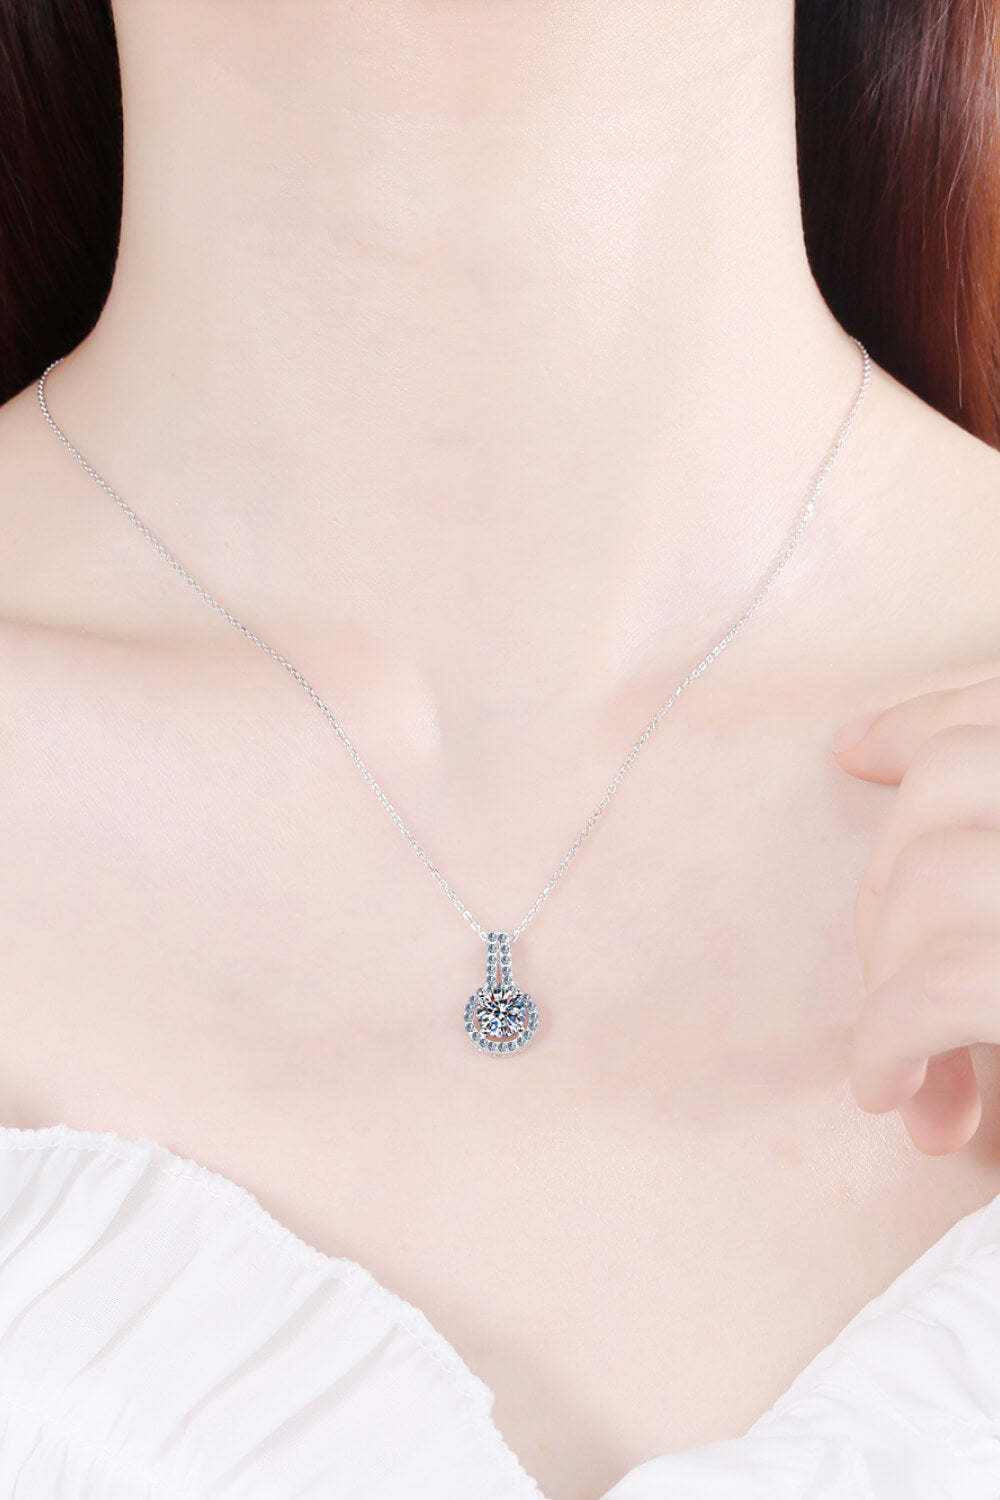 Build You Up Moissanite Round Pendant Chain Necklace Trendsi